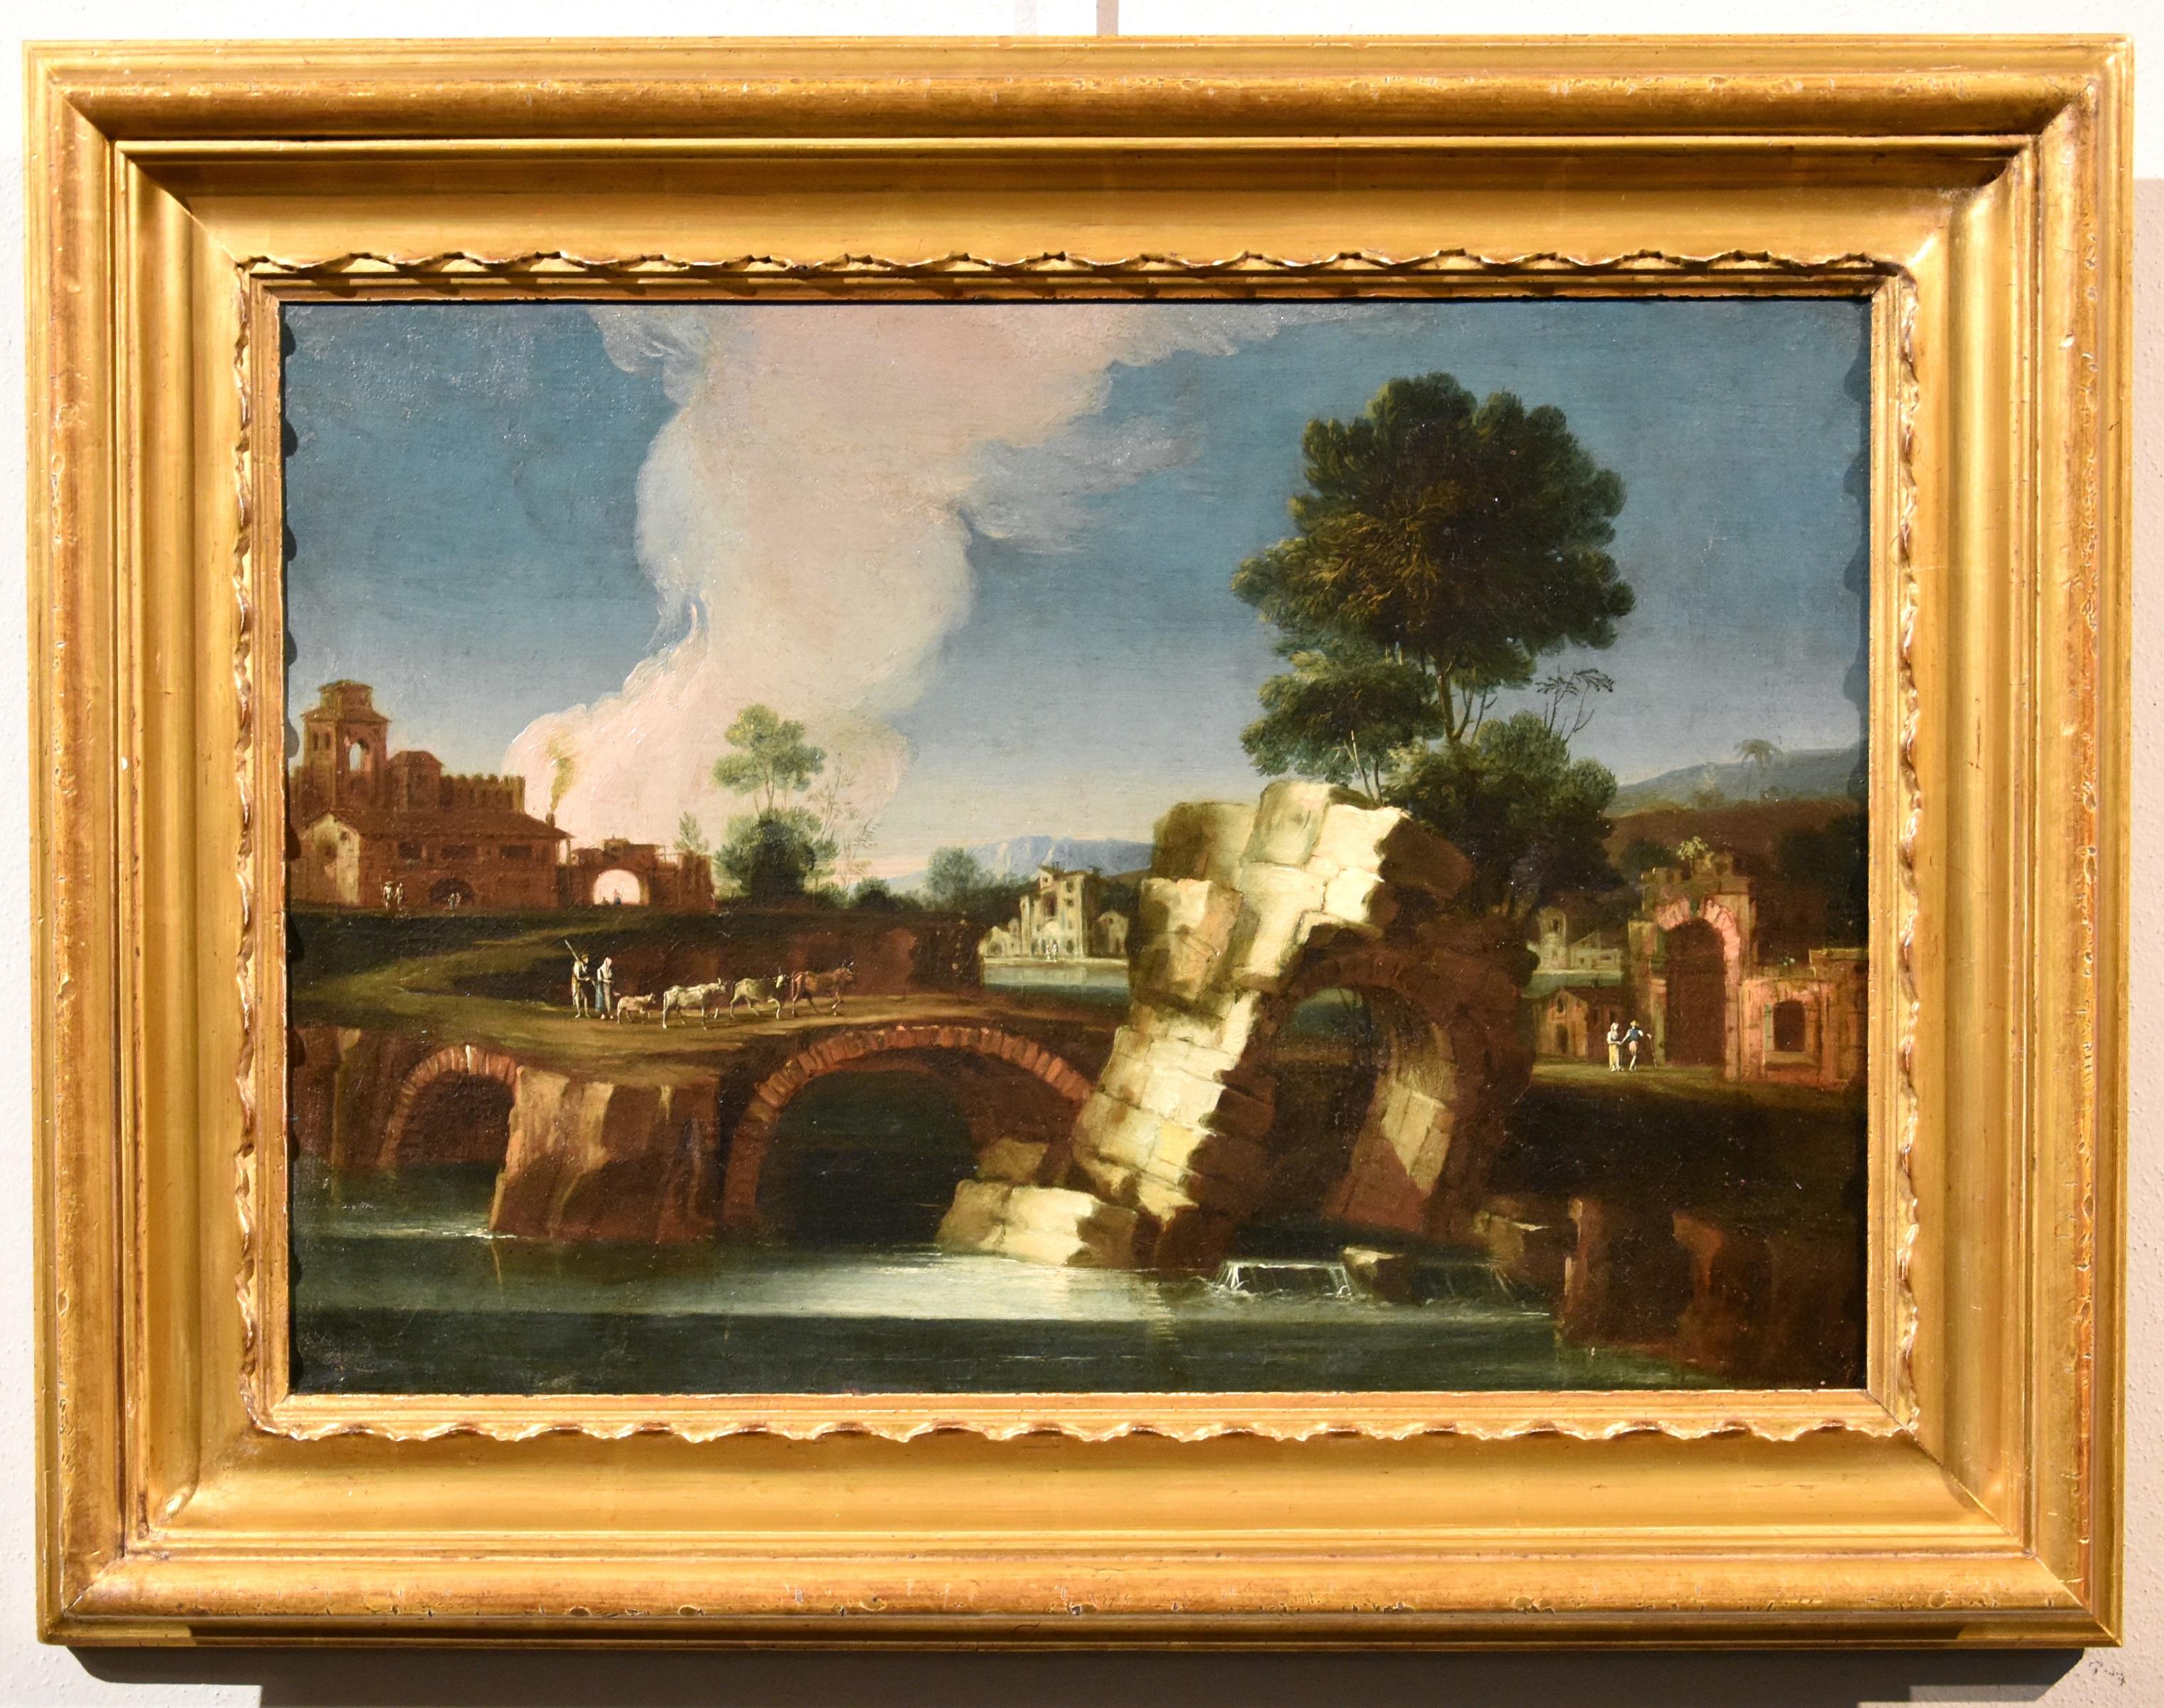 Landscape Paint Oil on canvas 18th Century Old master Roma Italy River Water Art - Painting by Paolo Anesi (Rome 1697 - 1773)